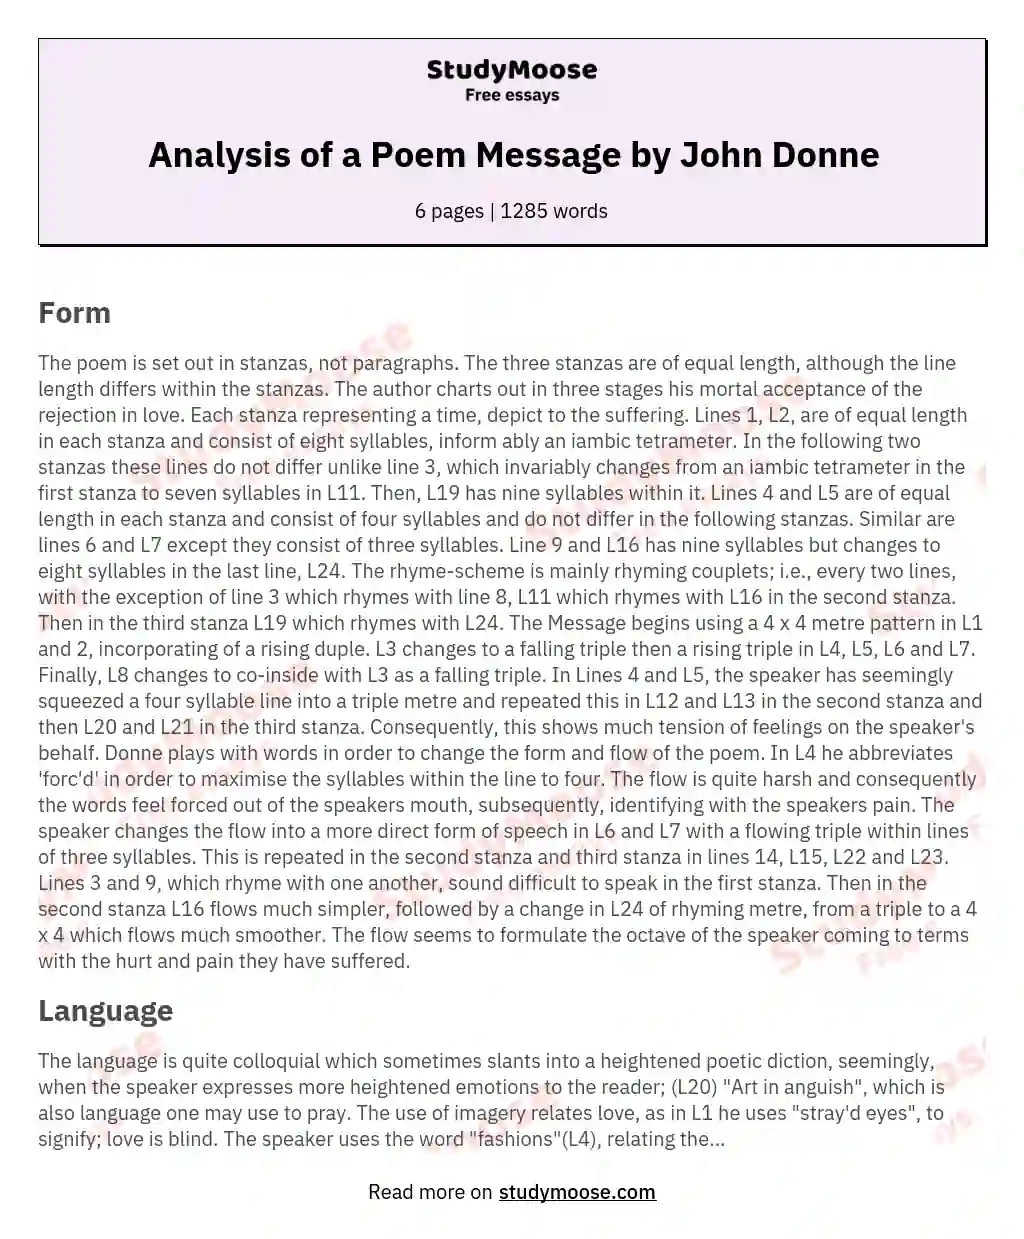 Analysis of a Poem Message by John Donne essay